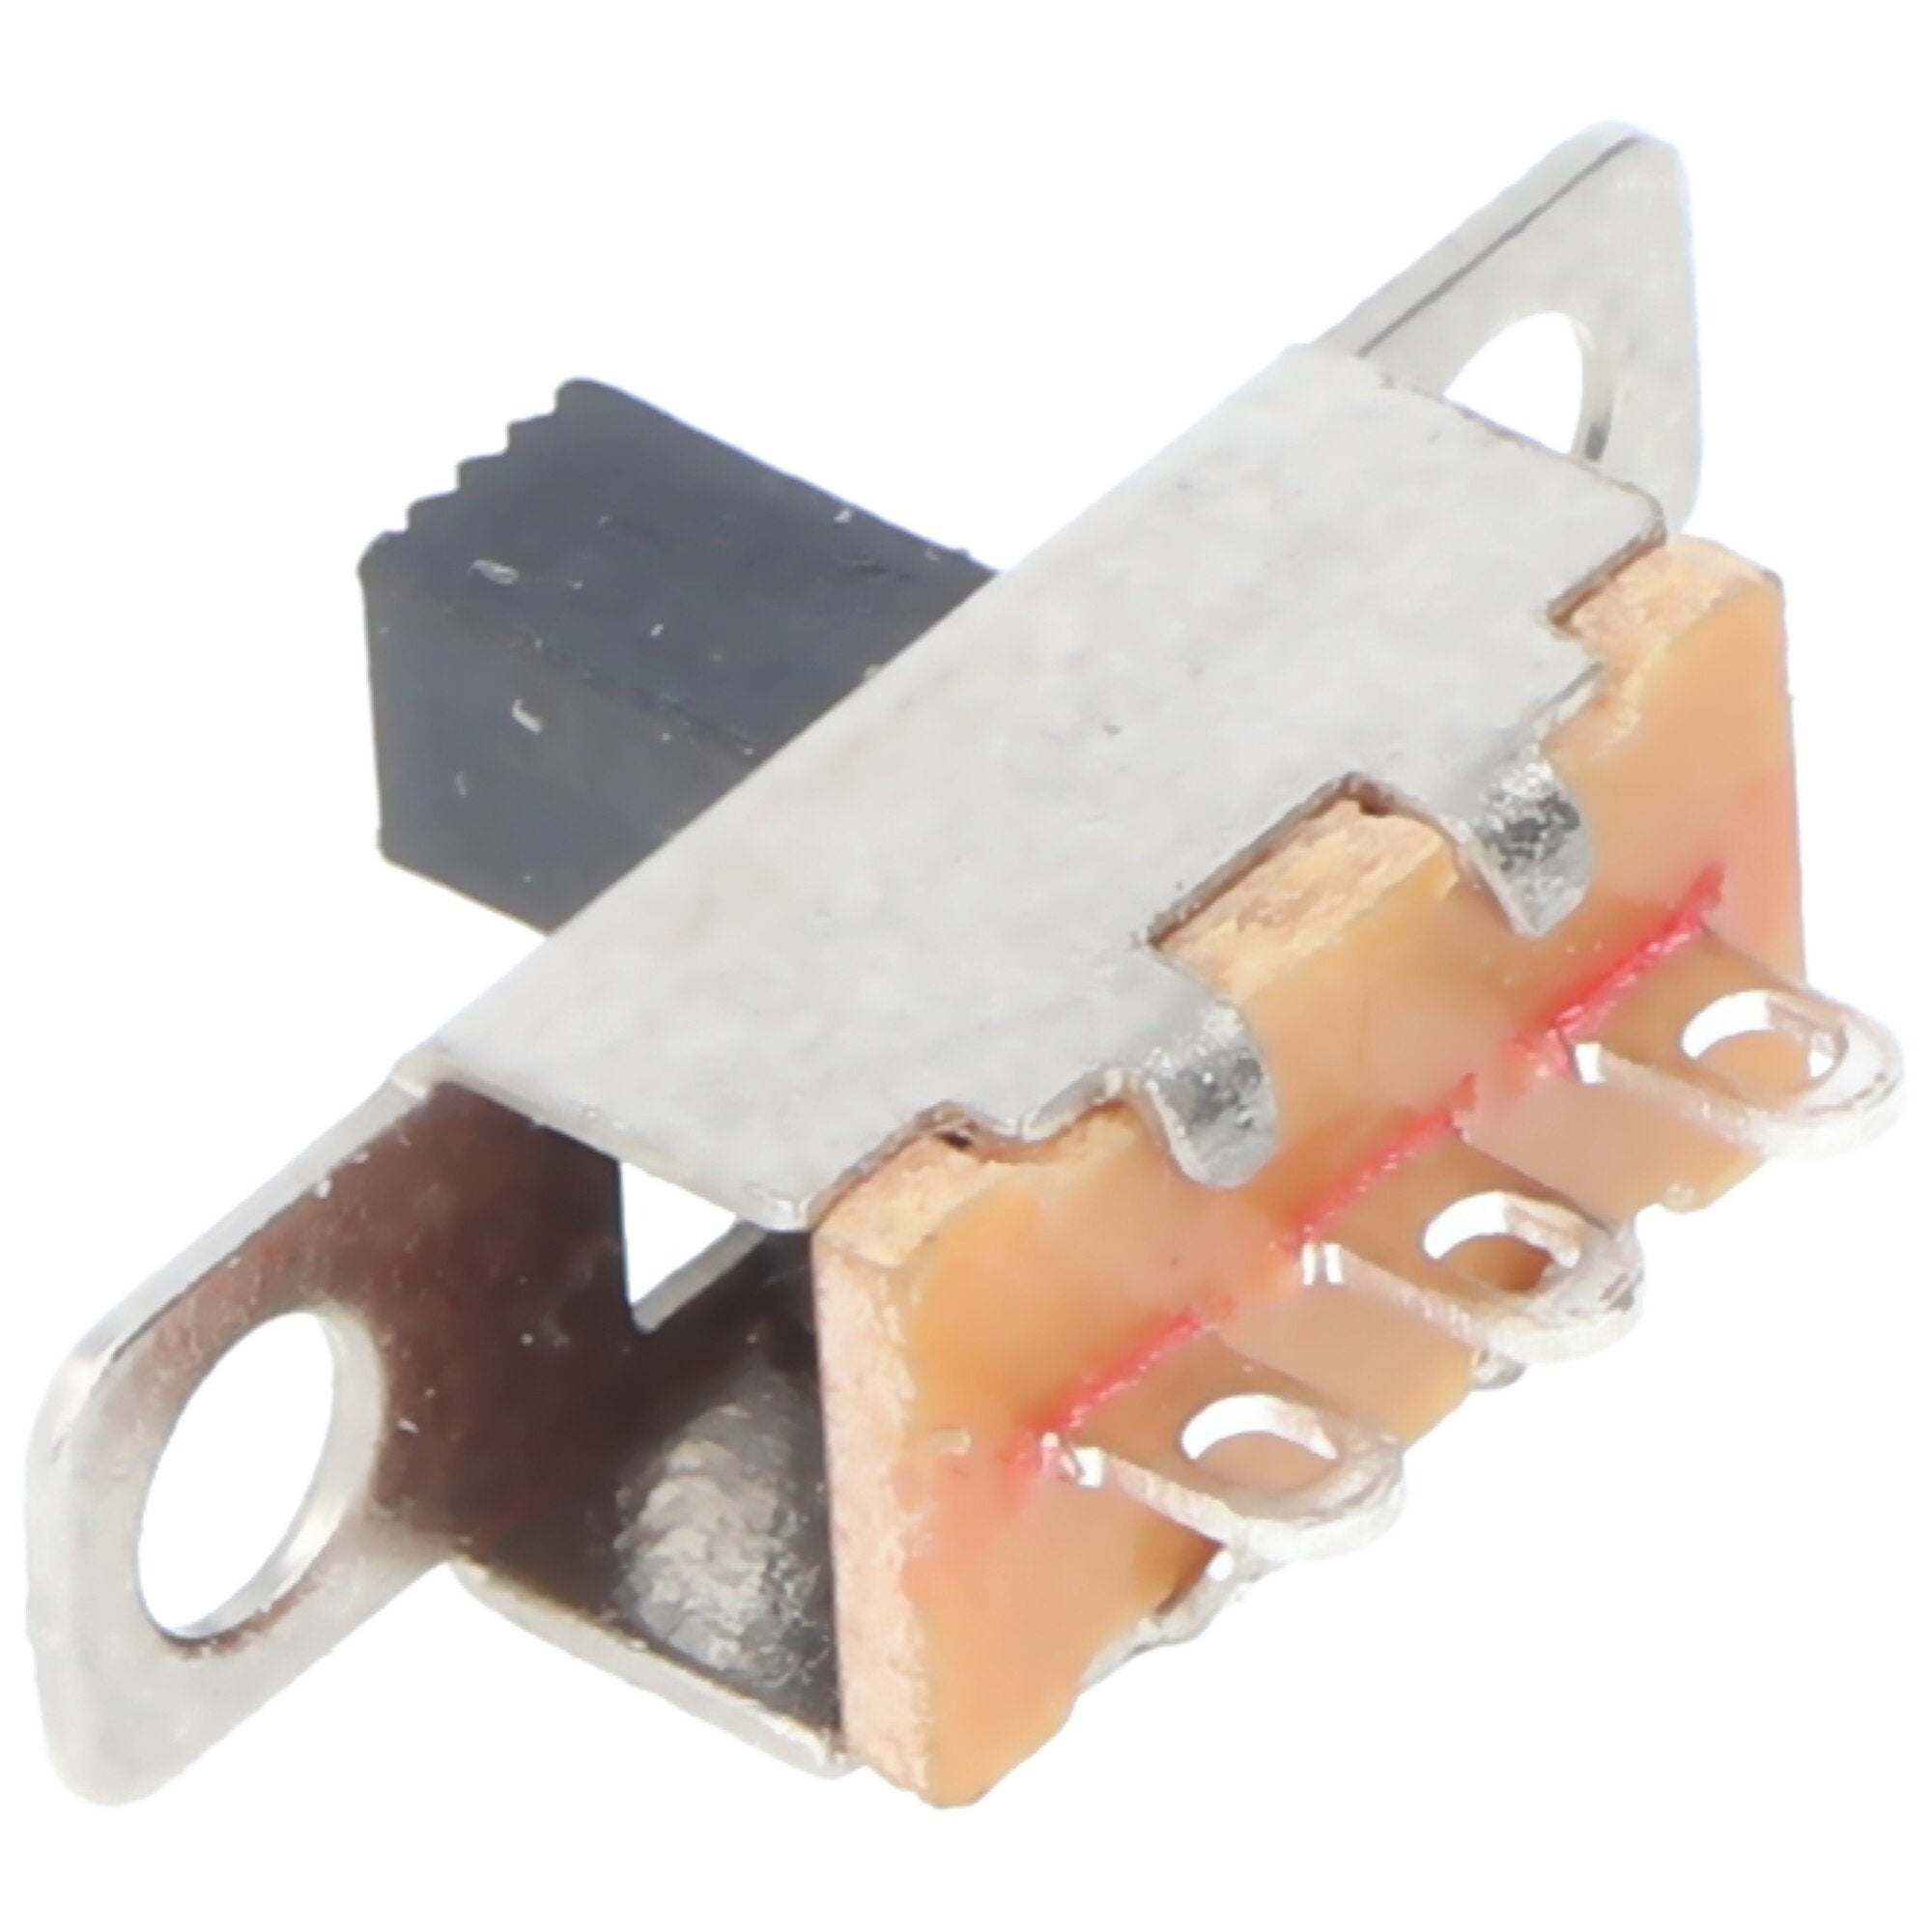 Goobay slide switch / toggle switch - function: 1 x TOGGLE